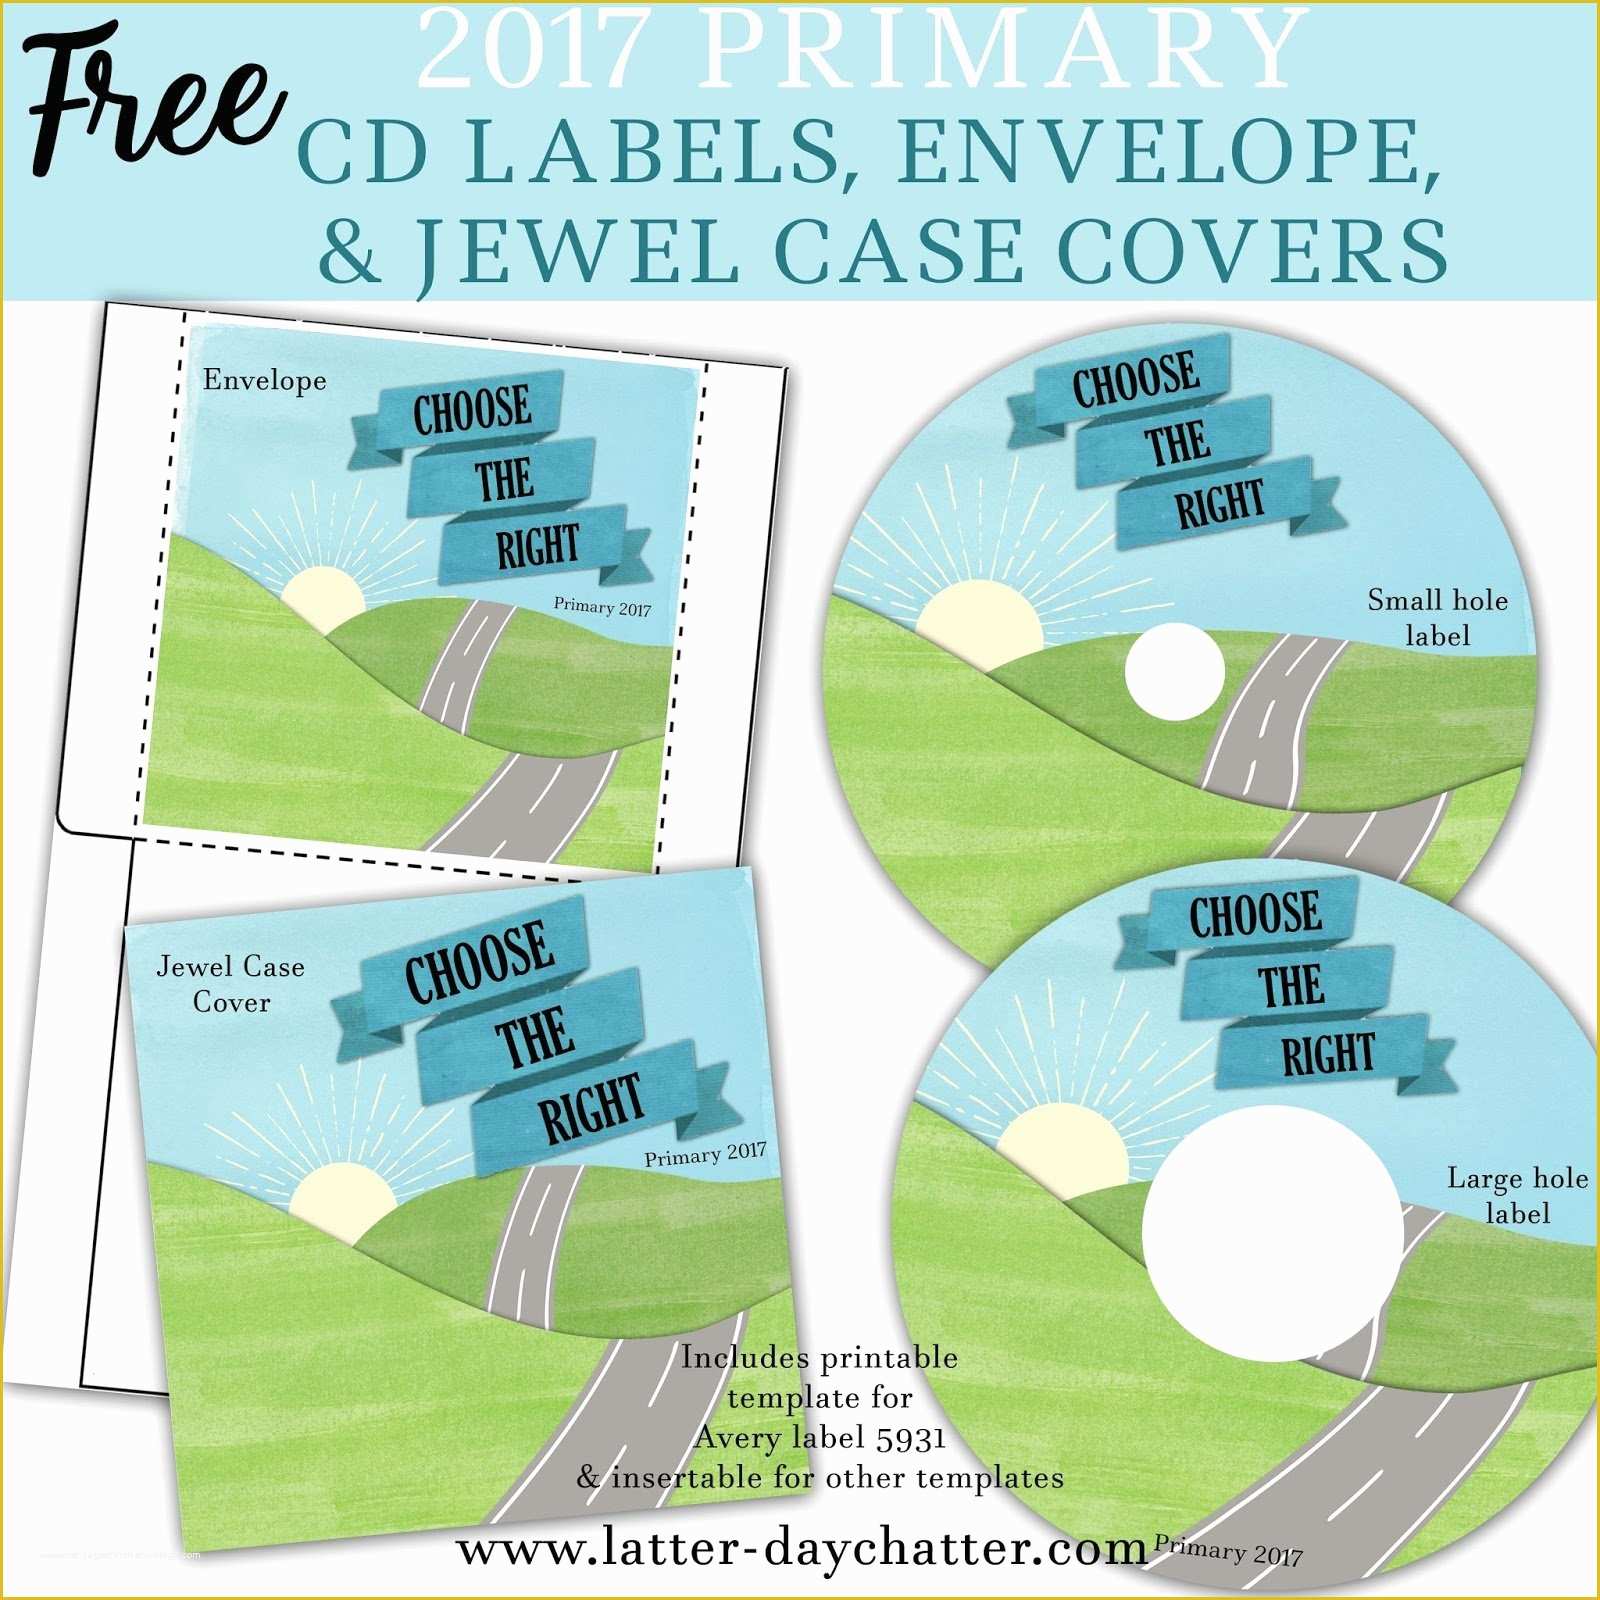 Avery Cd Labels Template 5931 Download Free Of Avery Cd Labels Template 5931 Download Free Inspirational